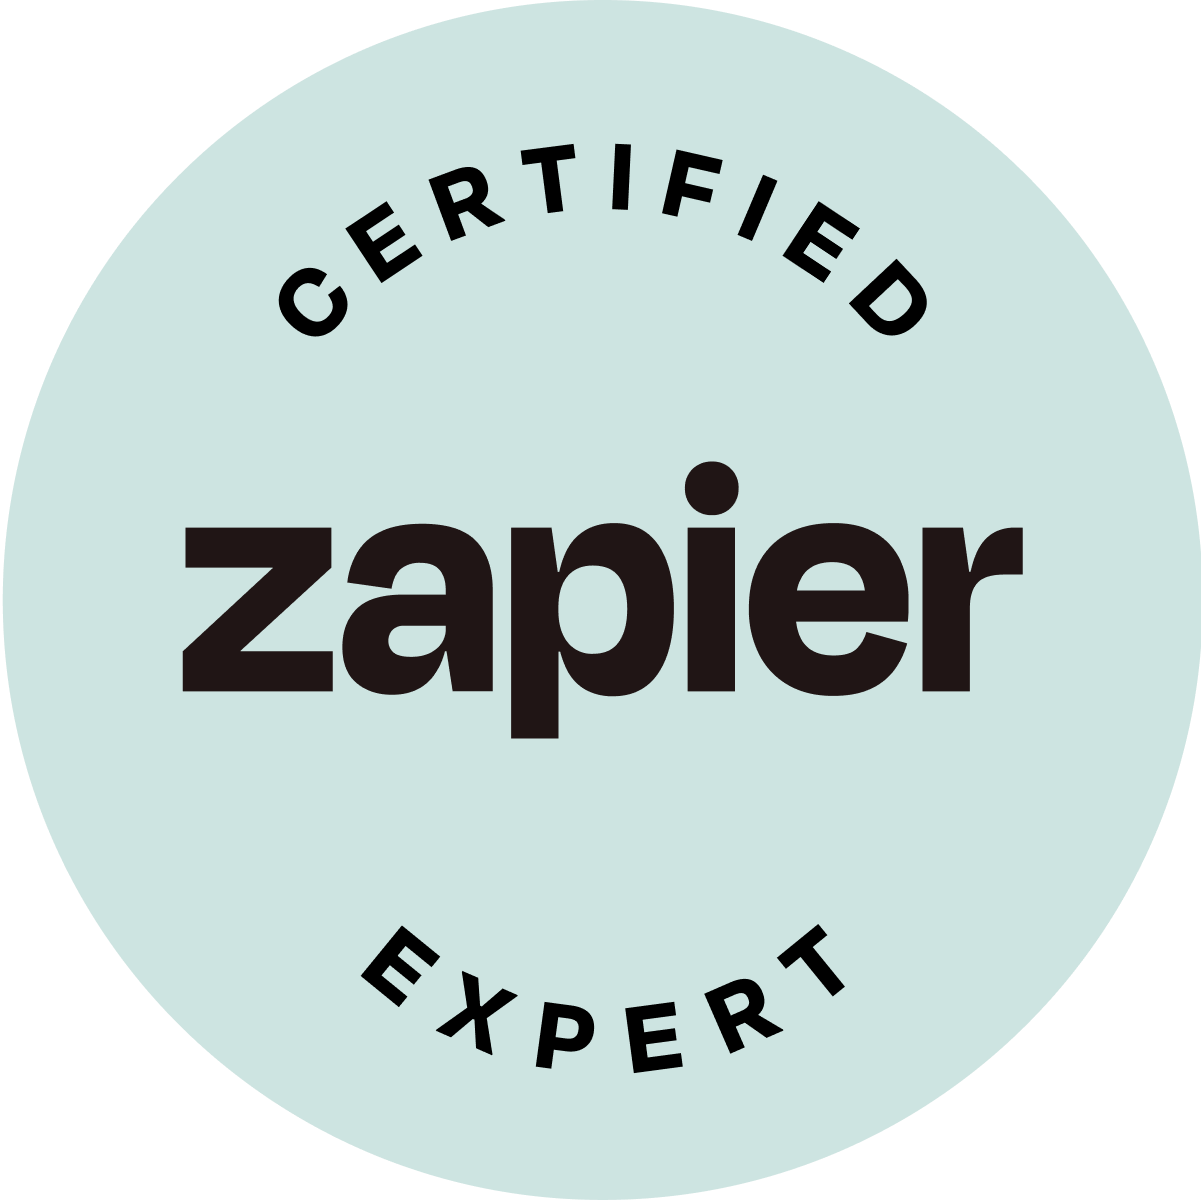 Thought Penny is a Certified Zapier Expert